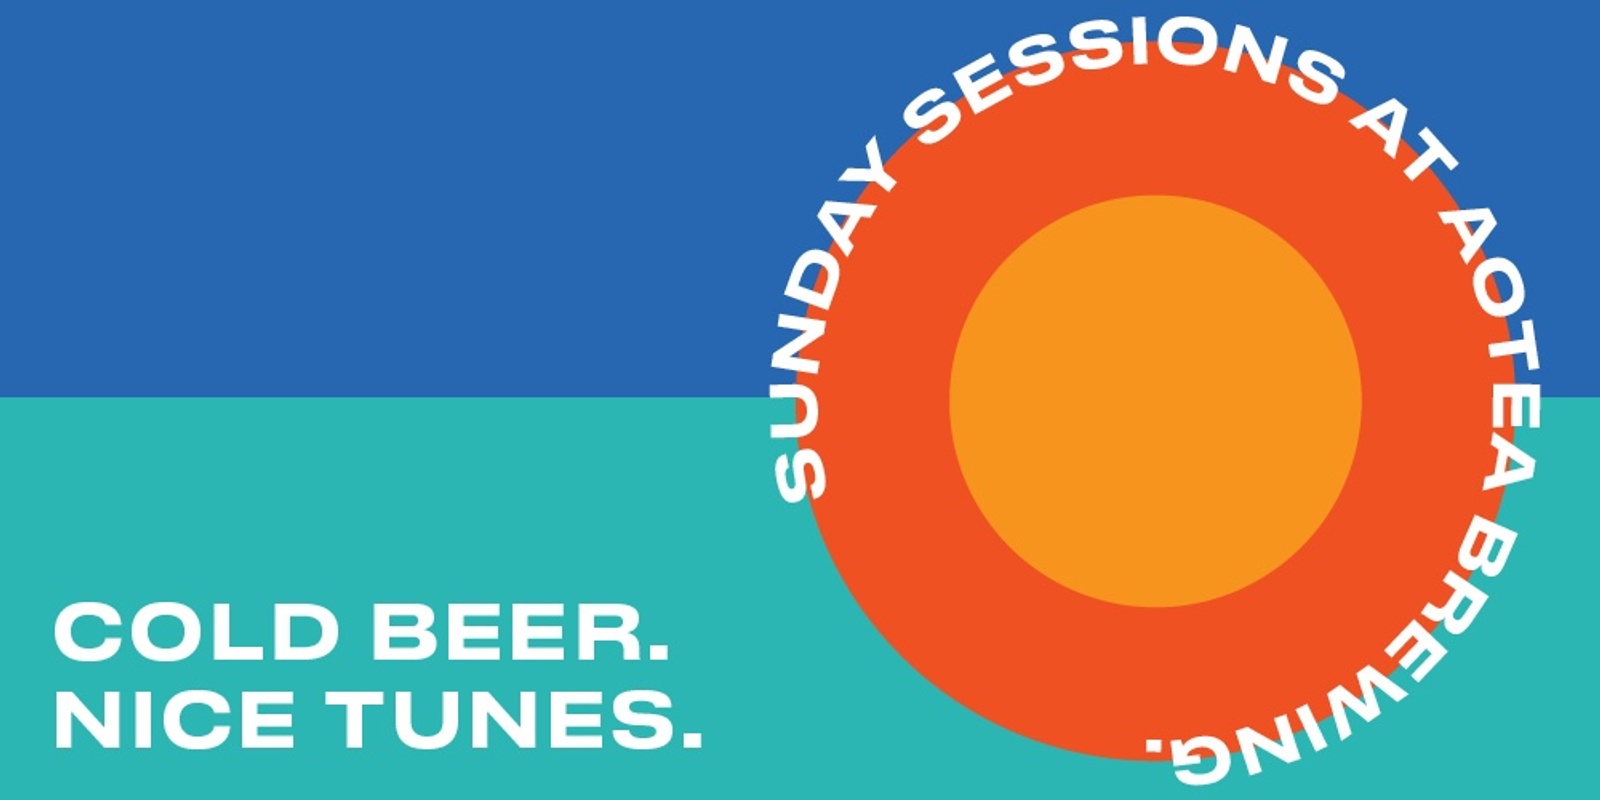 Banner image for Aotea Brewing Sunday Sessions 2022